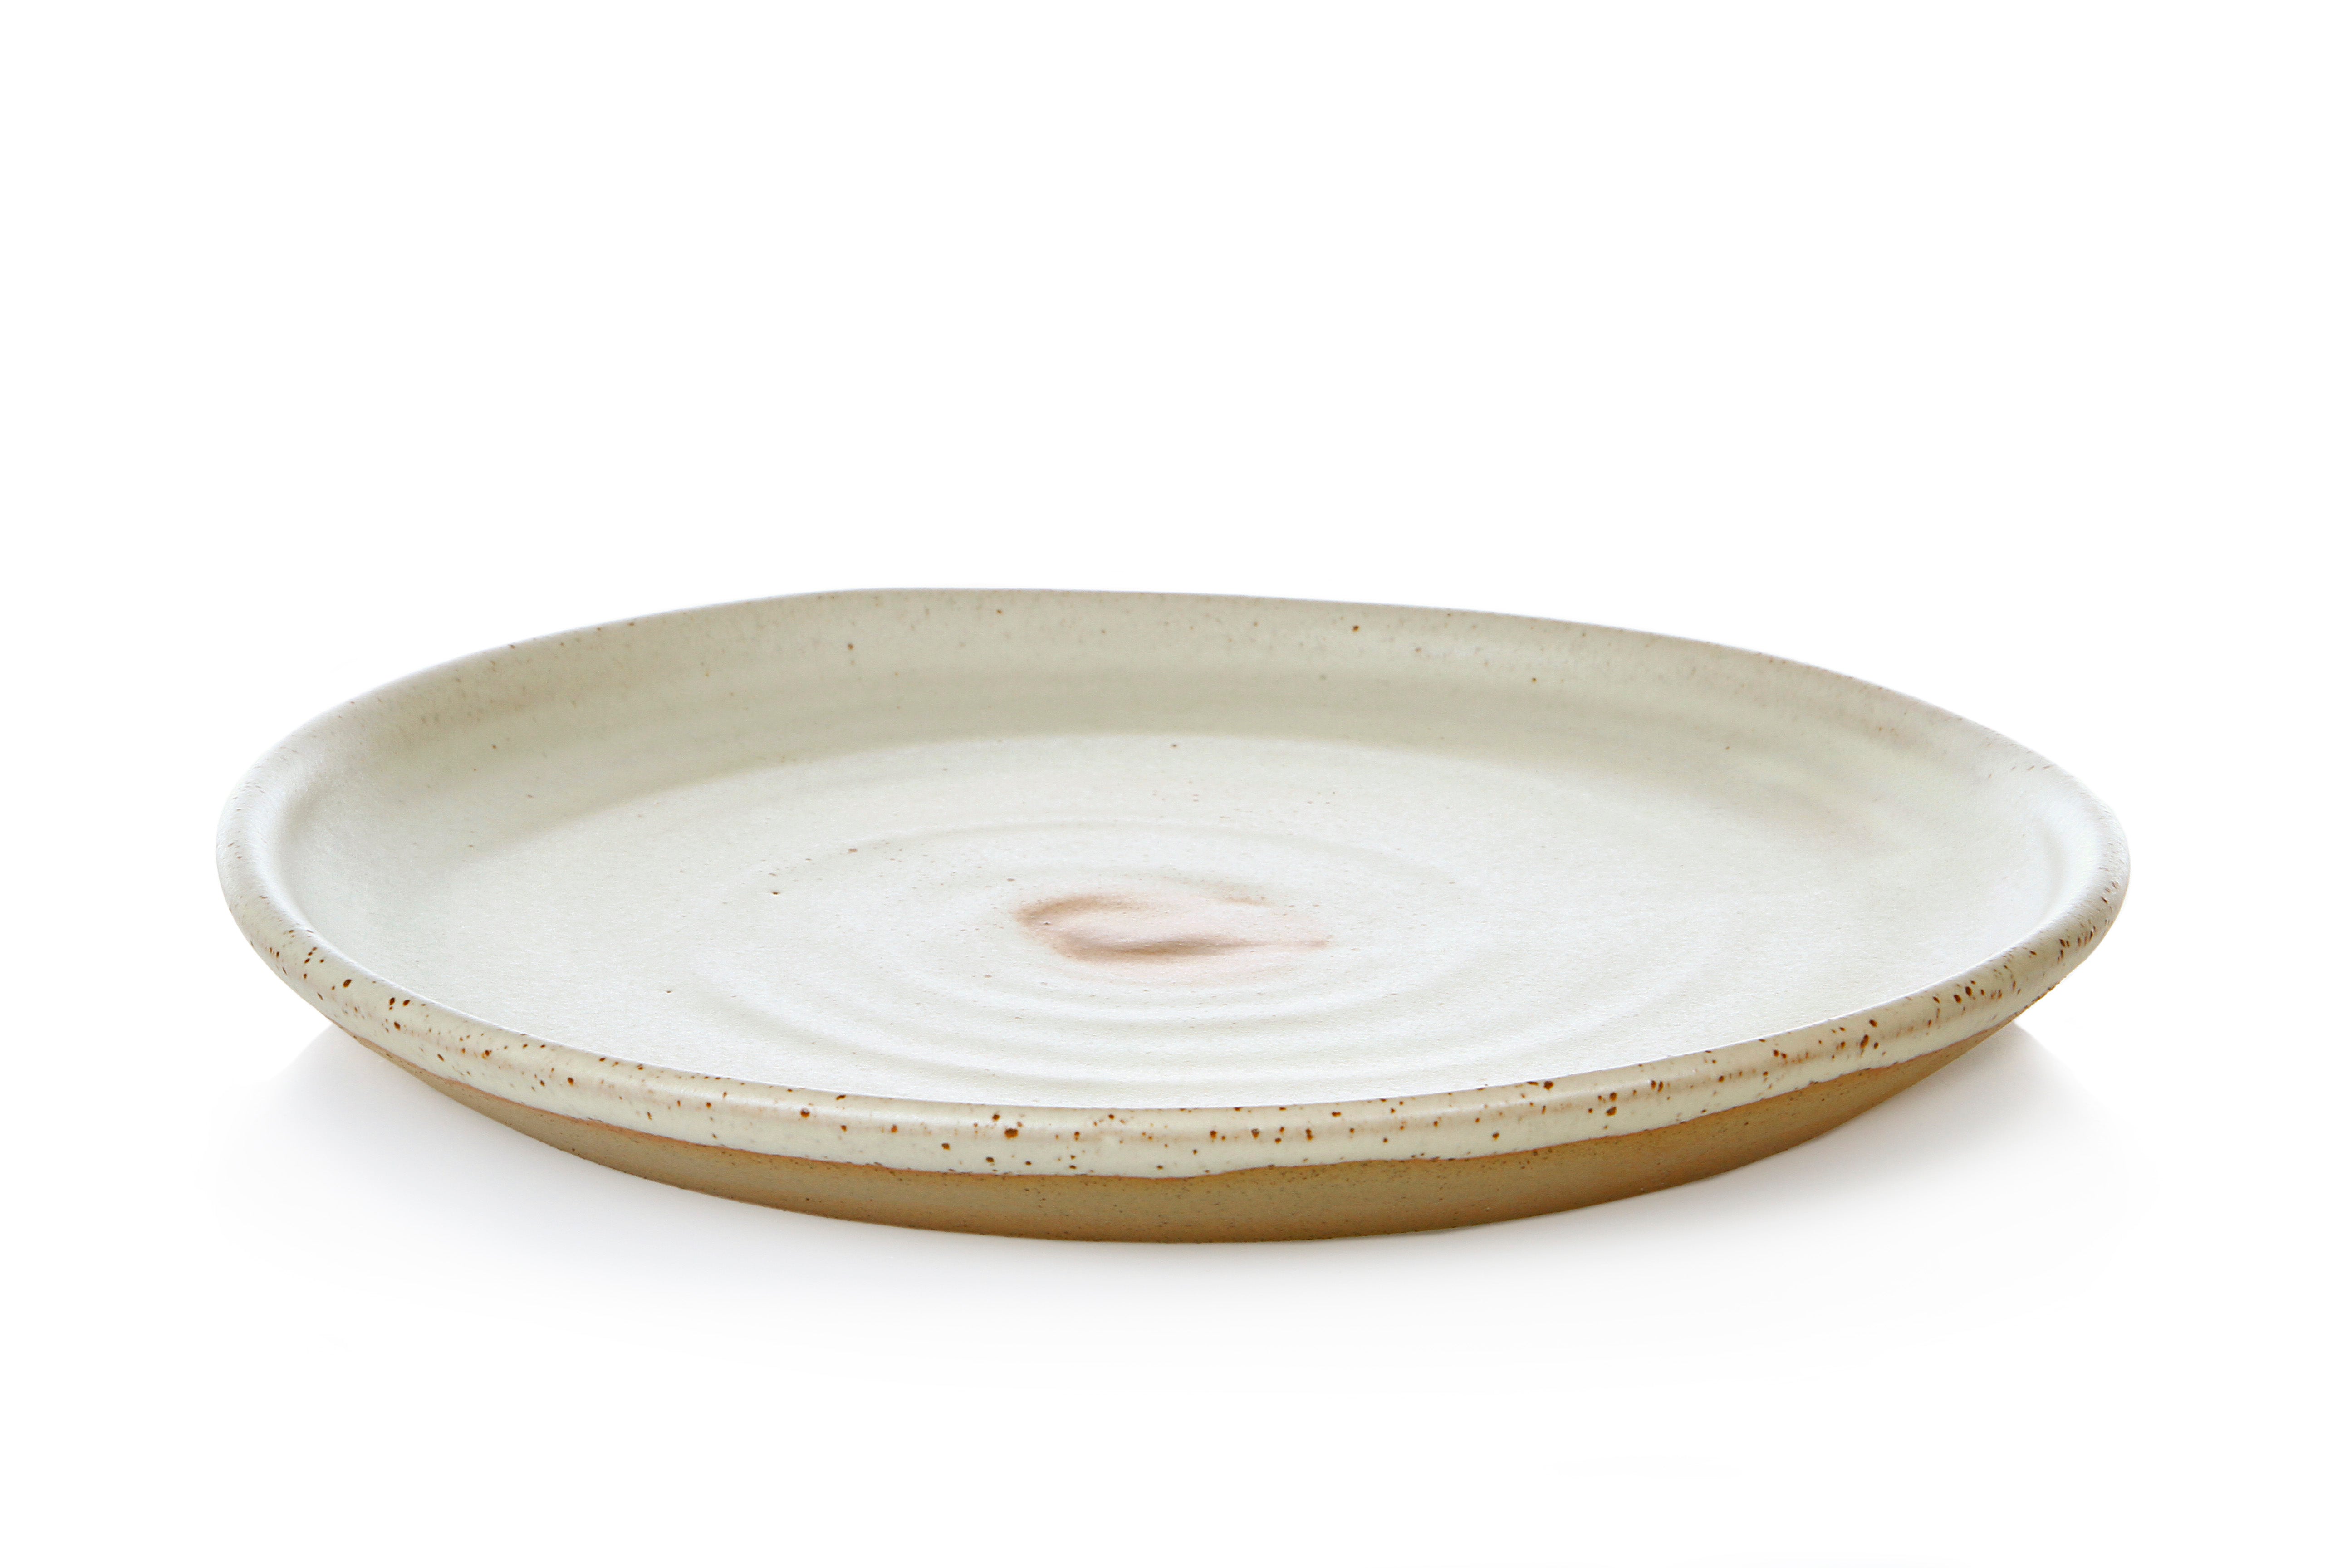 Earth 24cm Lunch Plate - Sand Dune (4 Pack)